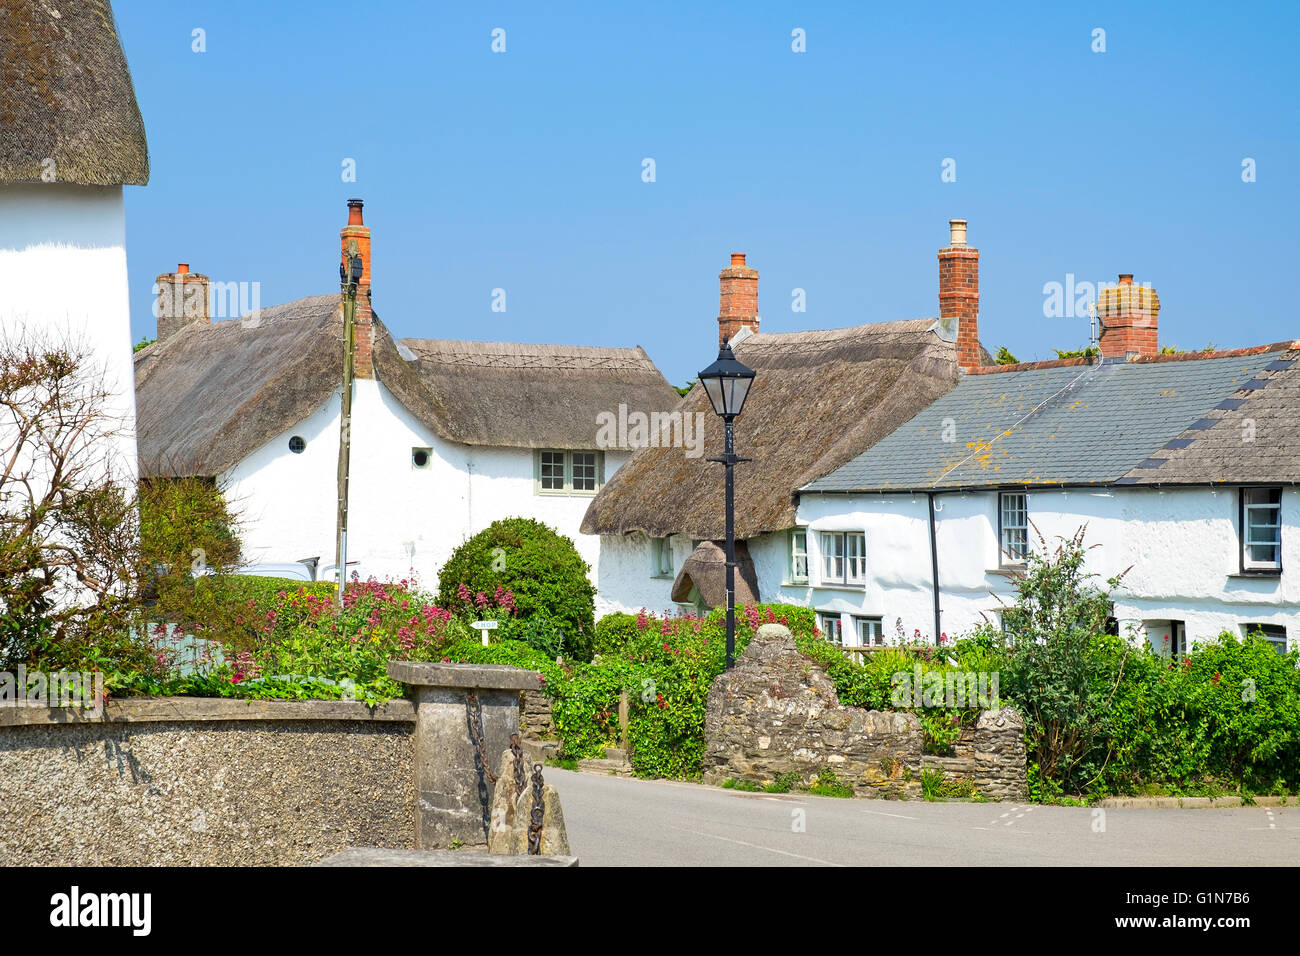 Thatched cottages in the village of Crantock, Cornwall, England, UK Stock Photo